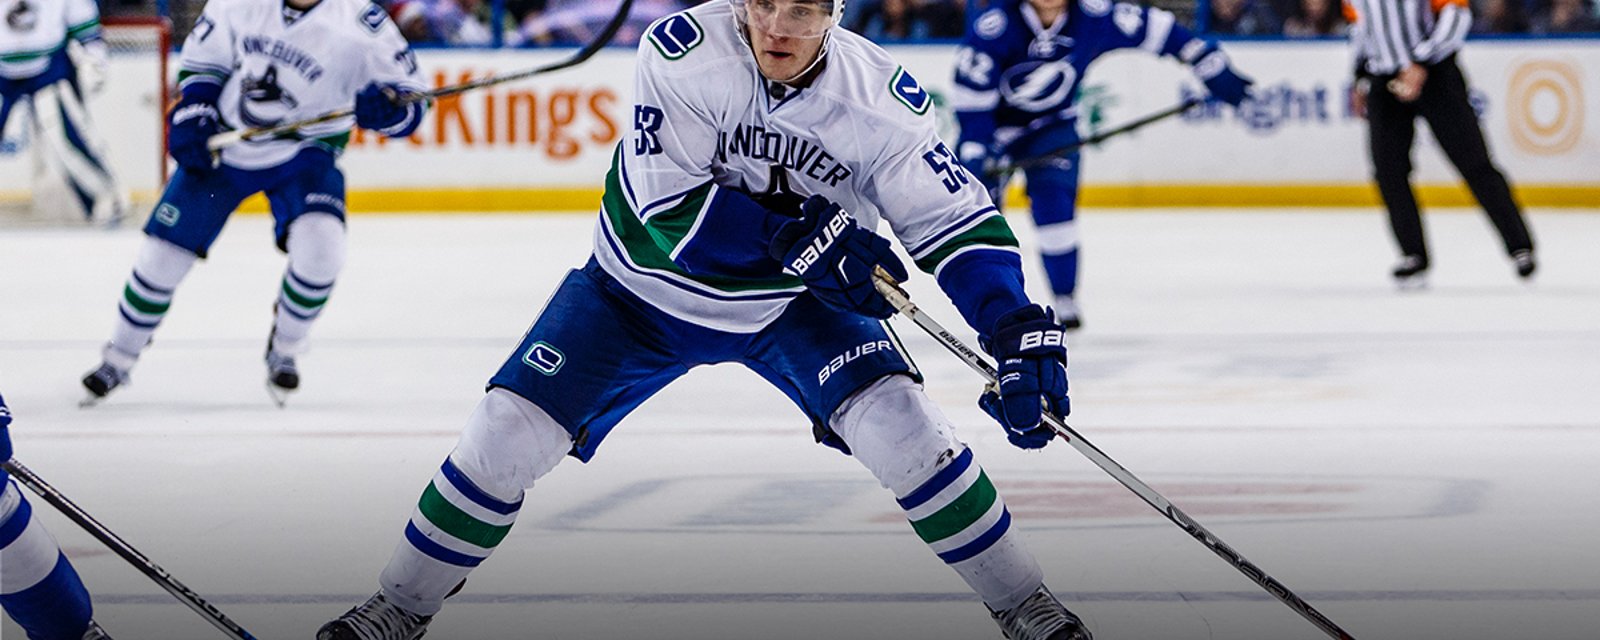 Breaking: Horvat contract details leaked!